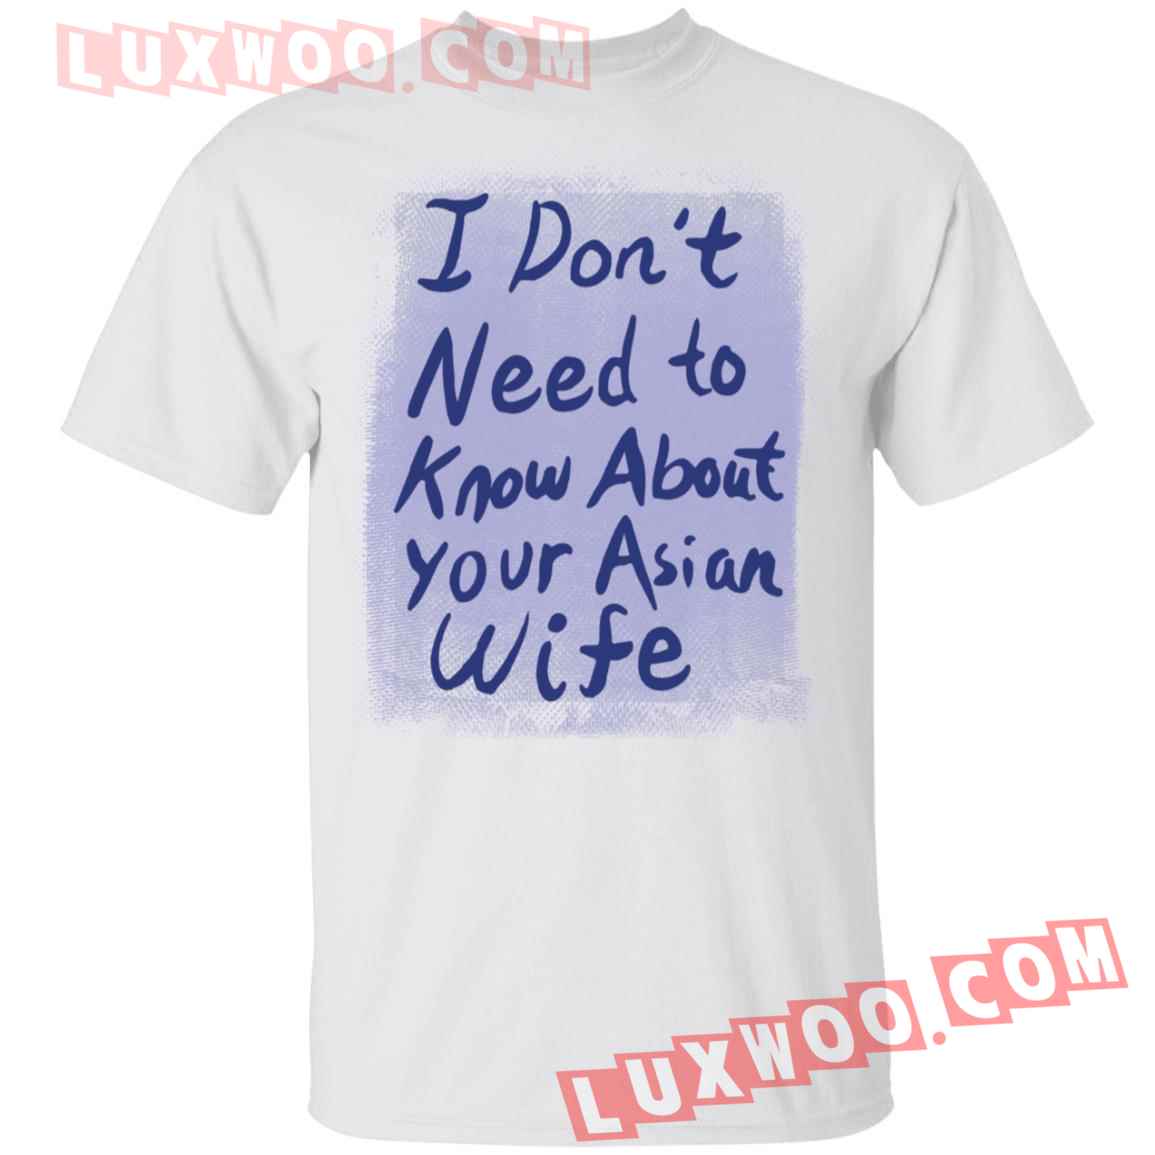 I Dont Need To Know About Your Asian Wife Shirt